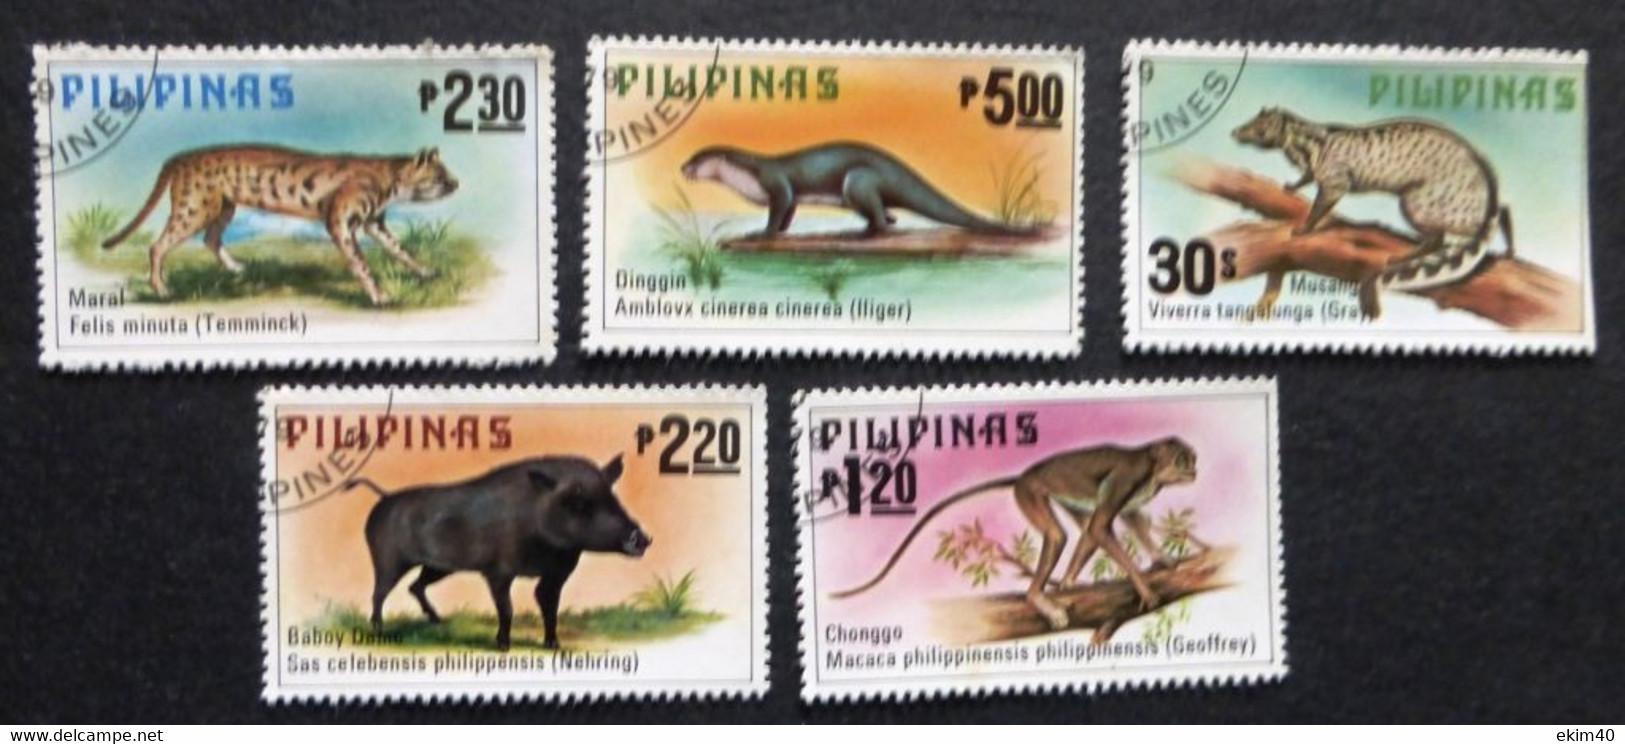 Selection Of Used/Cancelled Stamps From Philippines Wild Animals. No DC-373 - Oblitérés